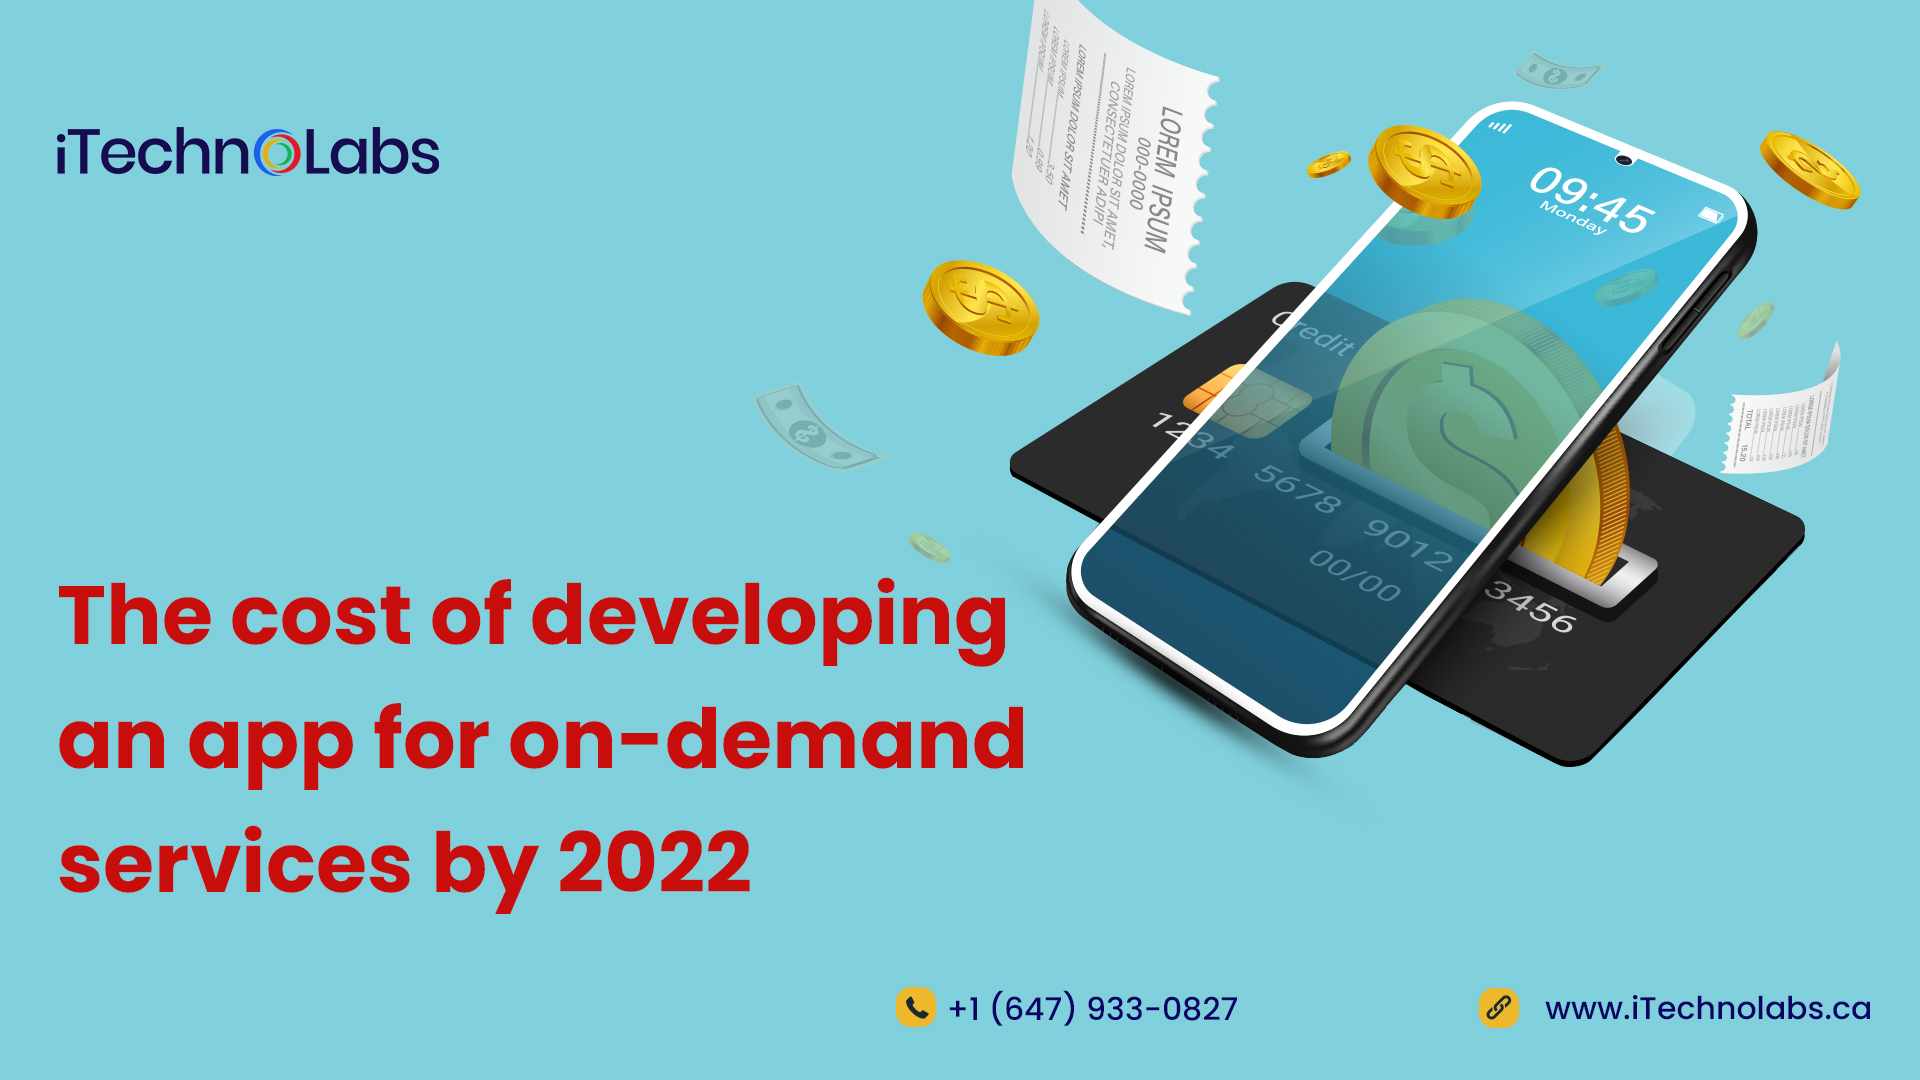 The-cost-of-developing-an-app-for-on-demand-services-by-2022-itechnolabs